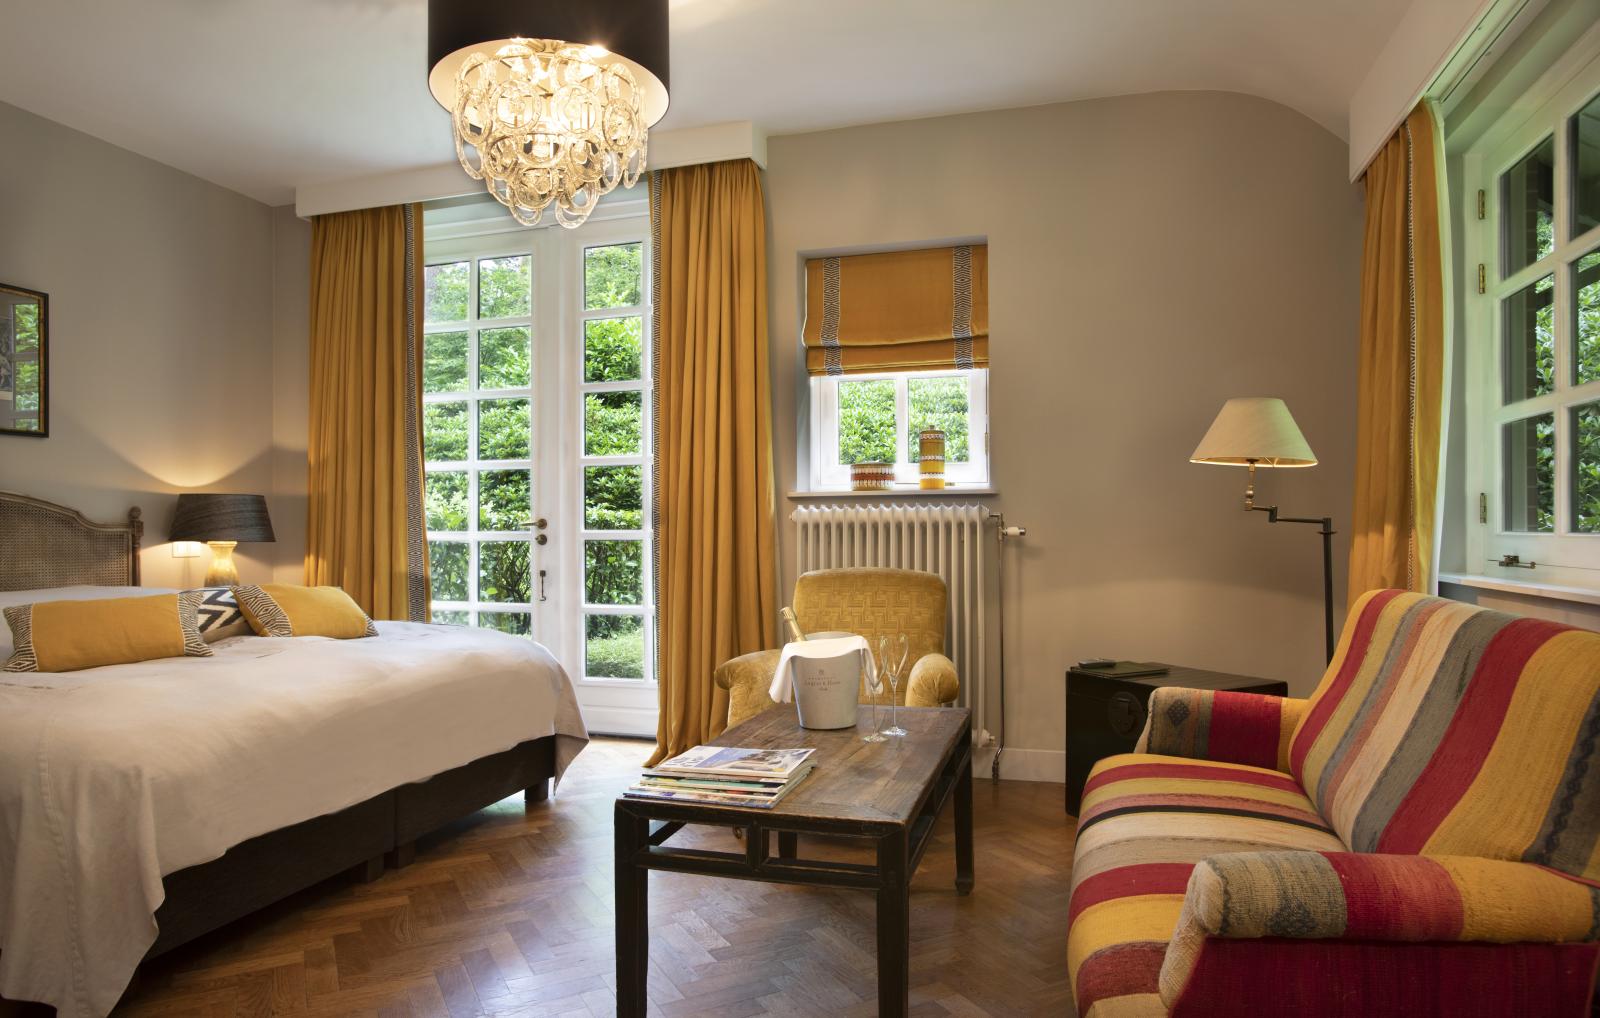 Hotel Rooms | Mansion Hotel Het Roode Koper Relais & Chateaux